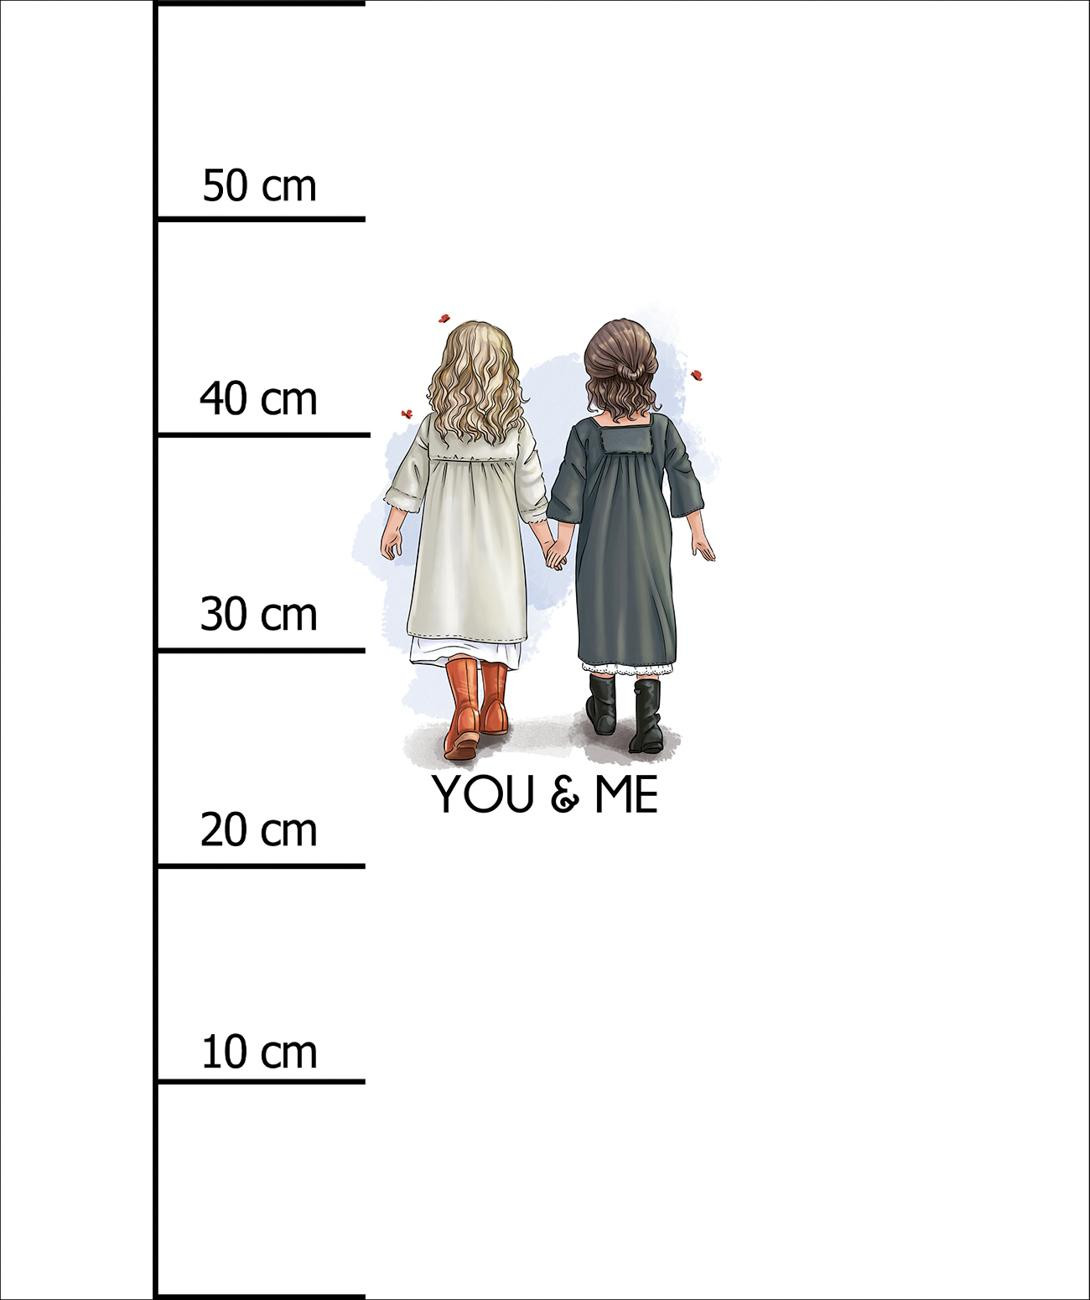 YOU & ME / girls -  PANEL (60cm x 50cm) brushed knitwear with elastane ITY